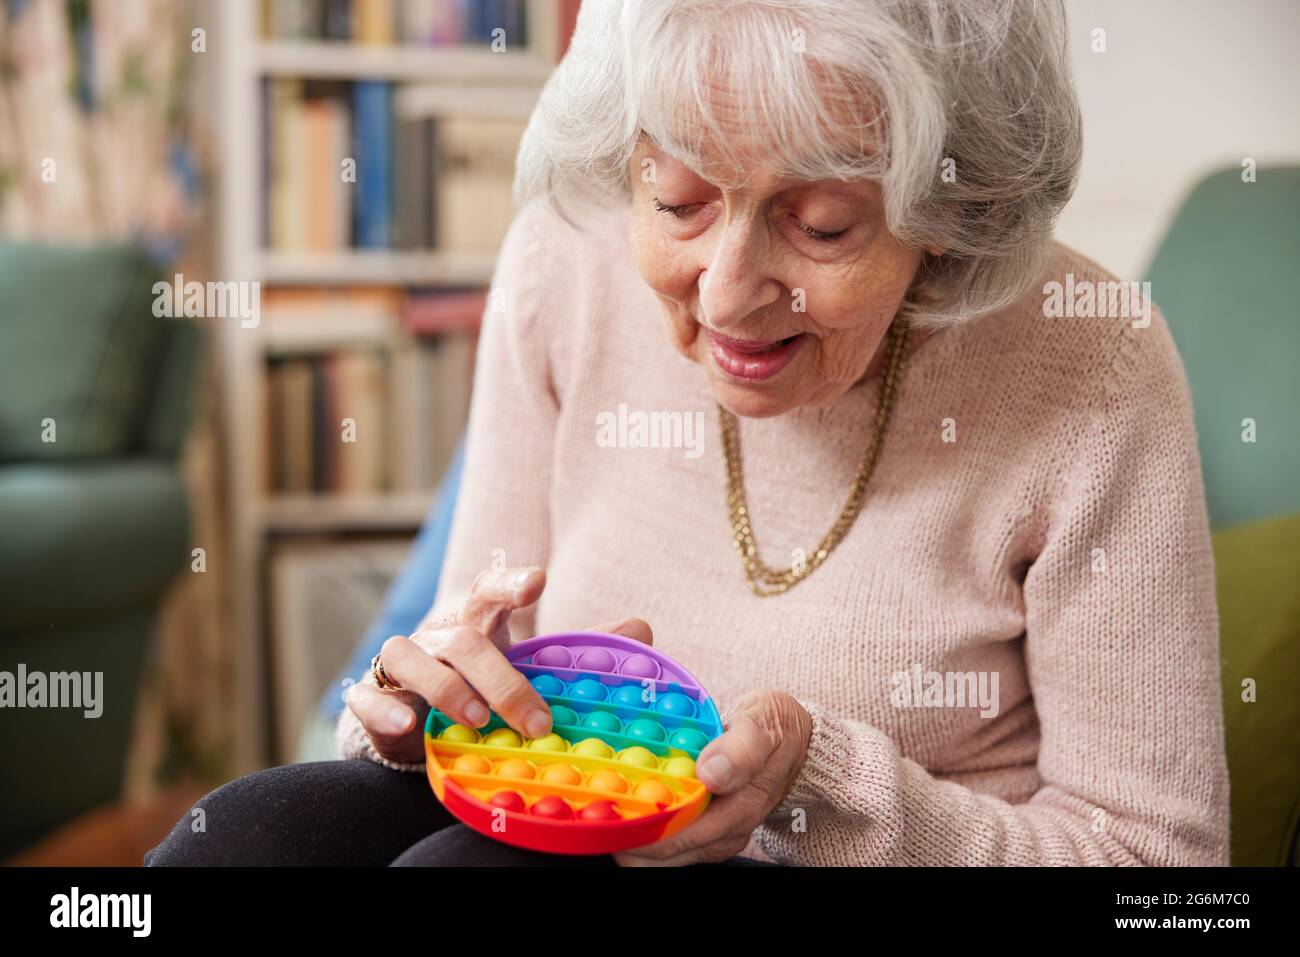 Senior Woman Using Colourful Fidget Toy To Improve Mental Stimulation At Home Stock Photo